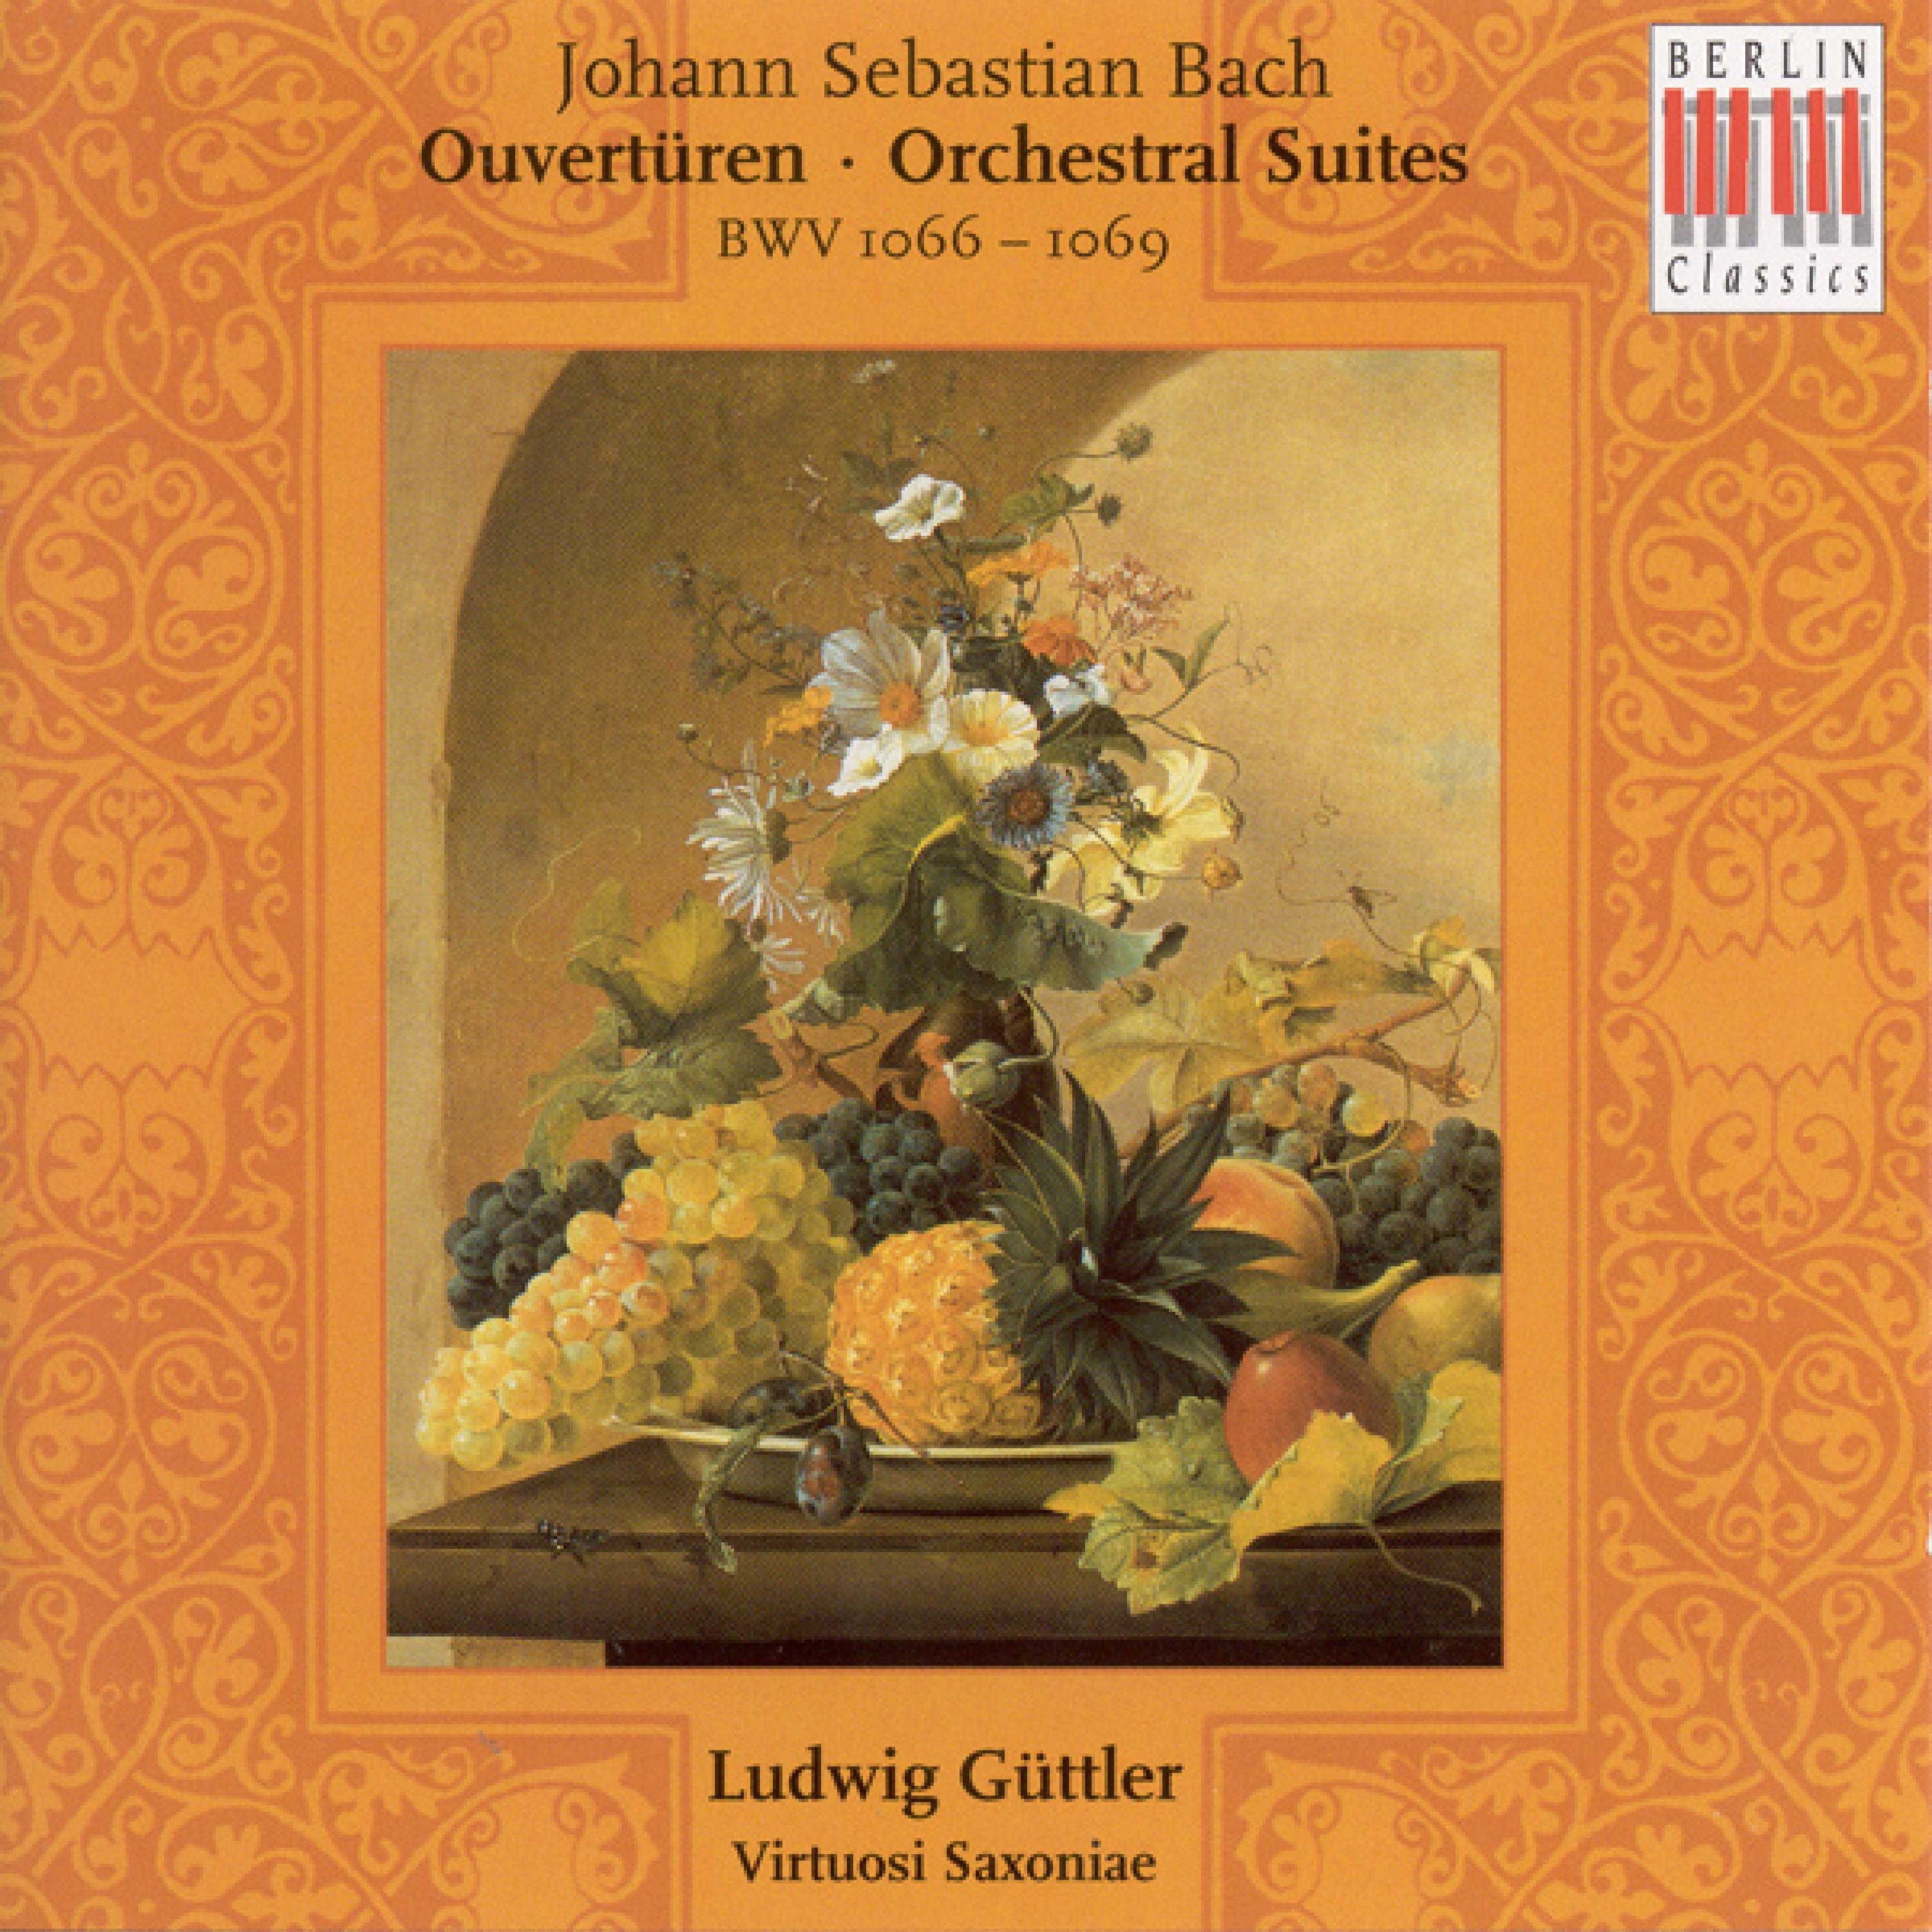 Orchestral Suite No. 2 in B-Flat Minor, BWV 1067: VII. Badinerie